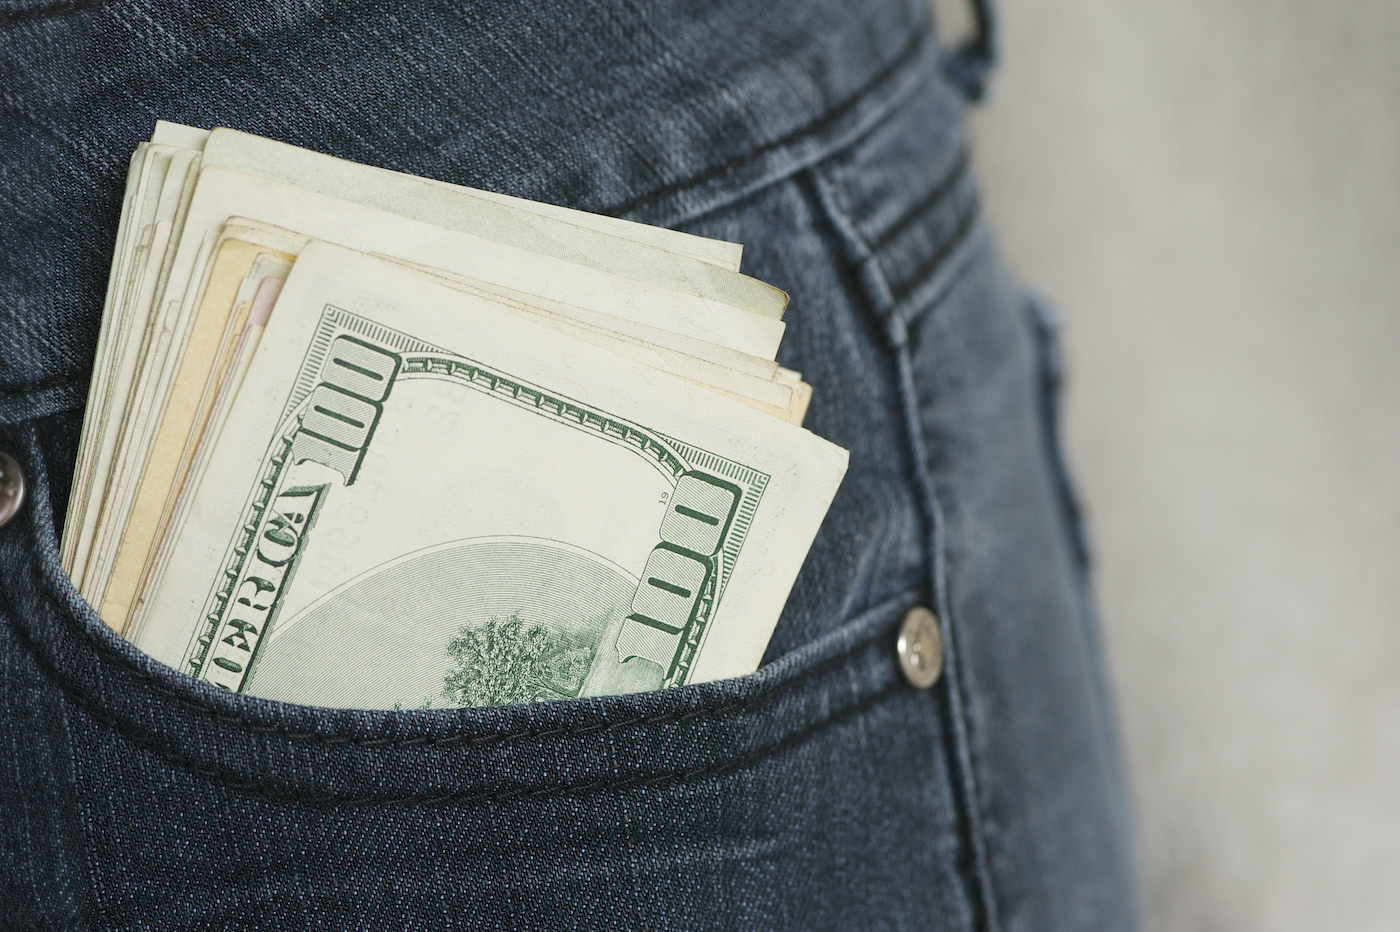 Cash bills in a sizable stack protrude from a jeans front pocket